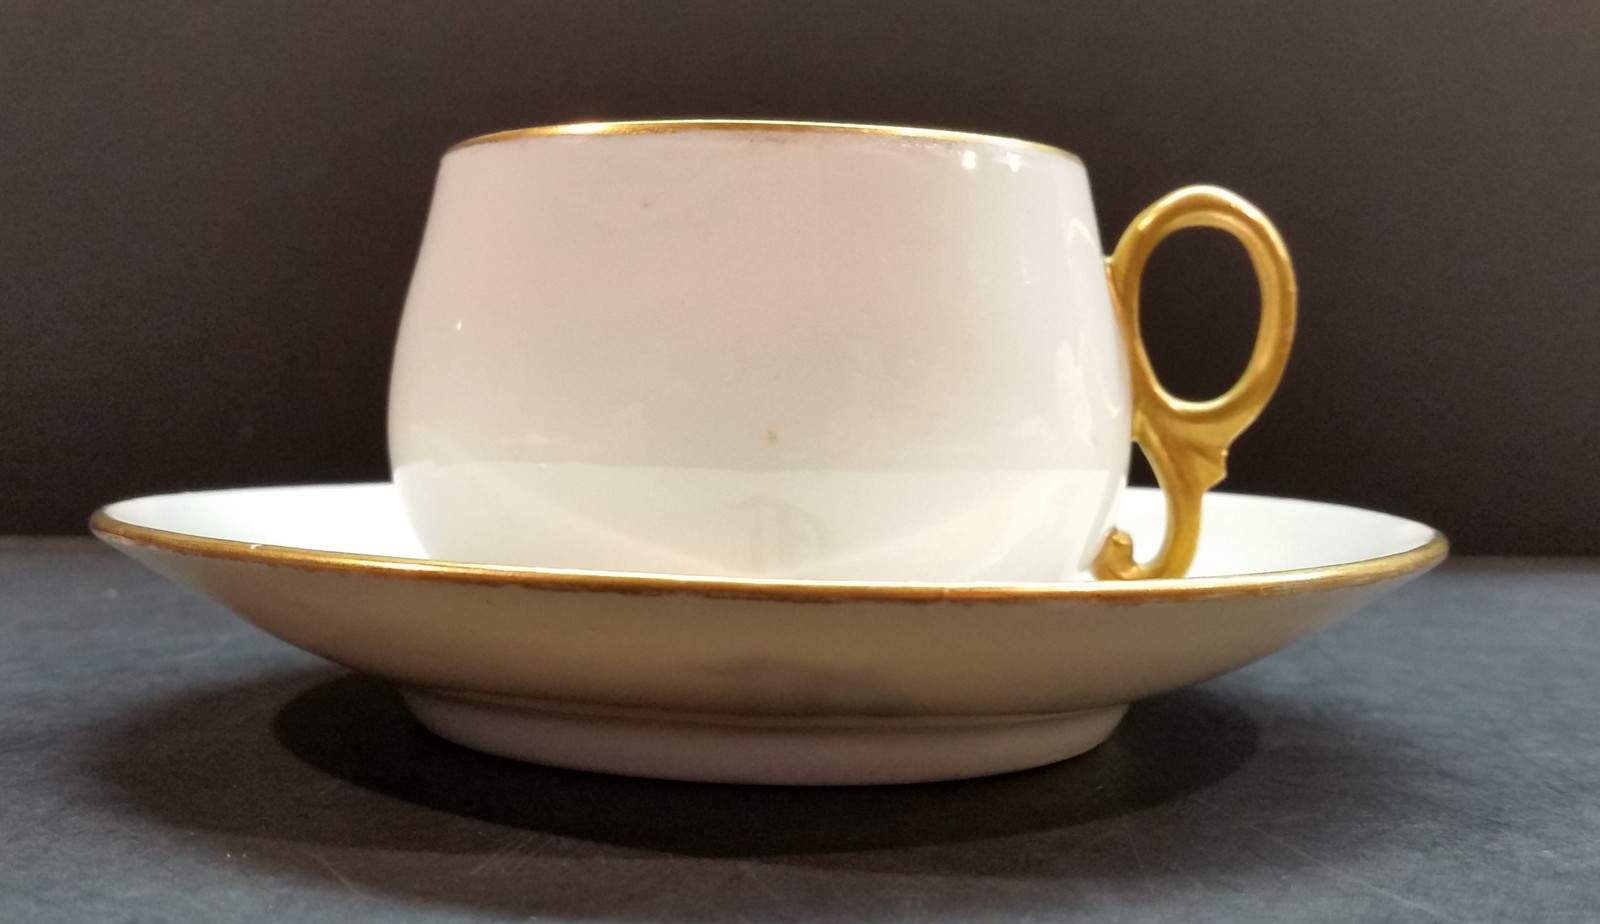 Limoges Gold Trim Cup and Saucer with “D” in gold on the saucer and marked “R D” - $40.00